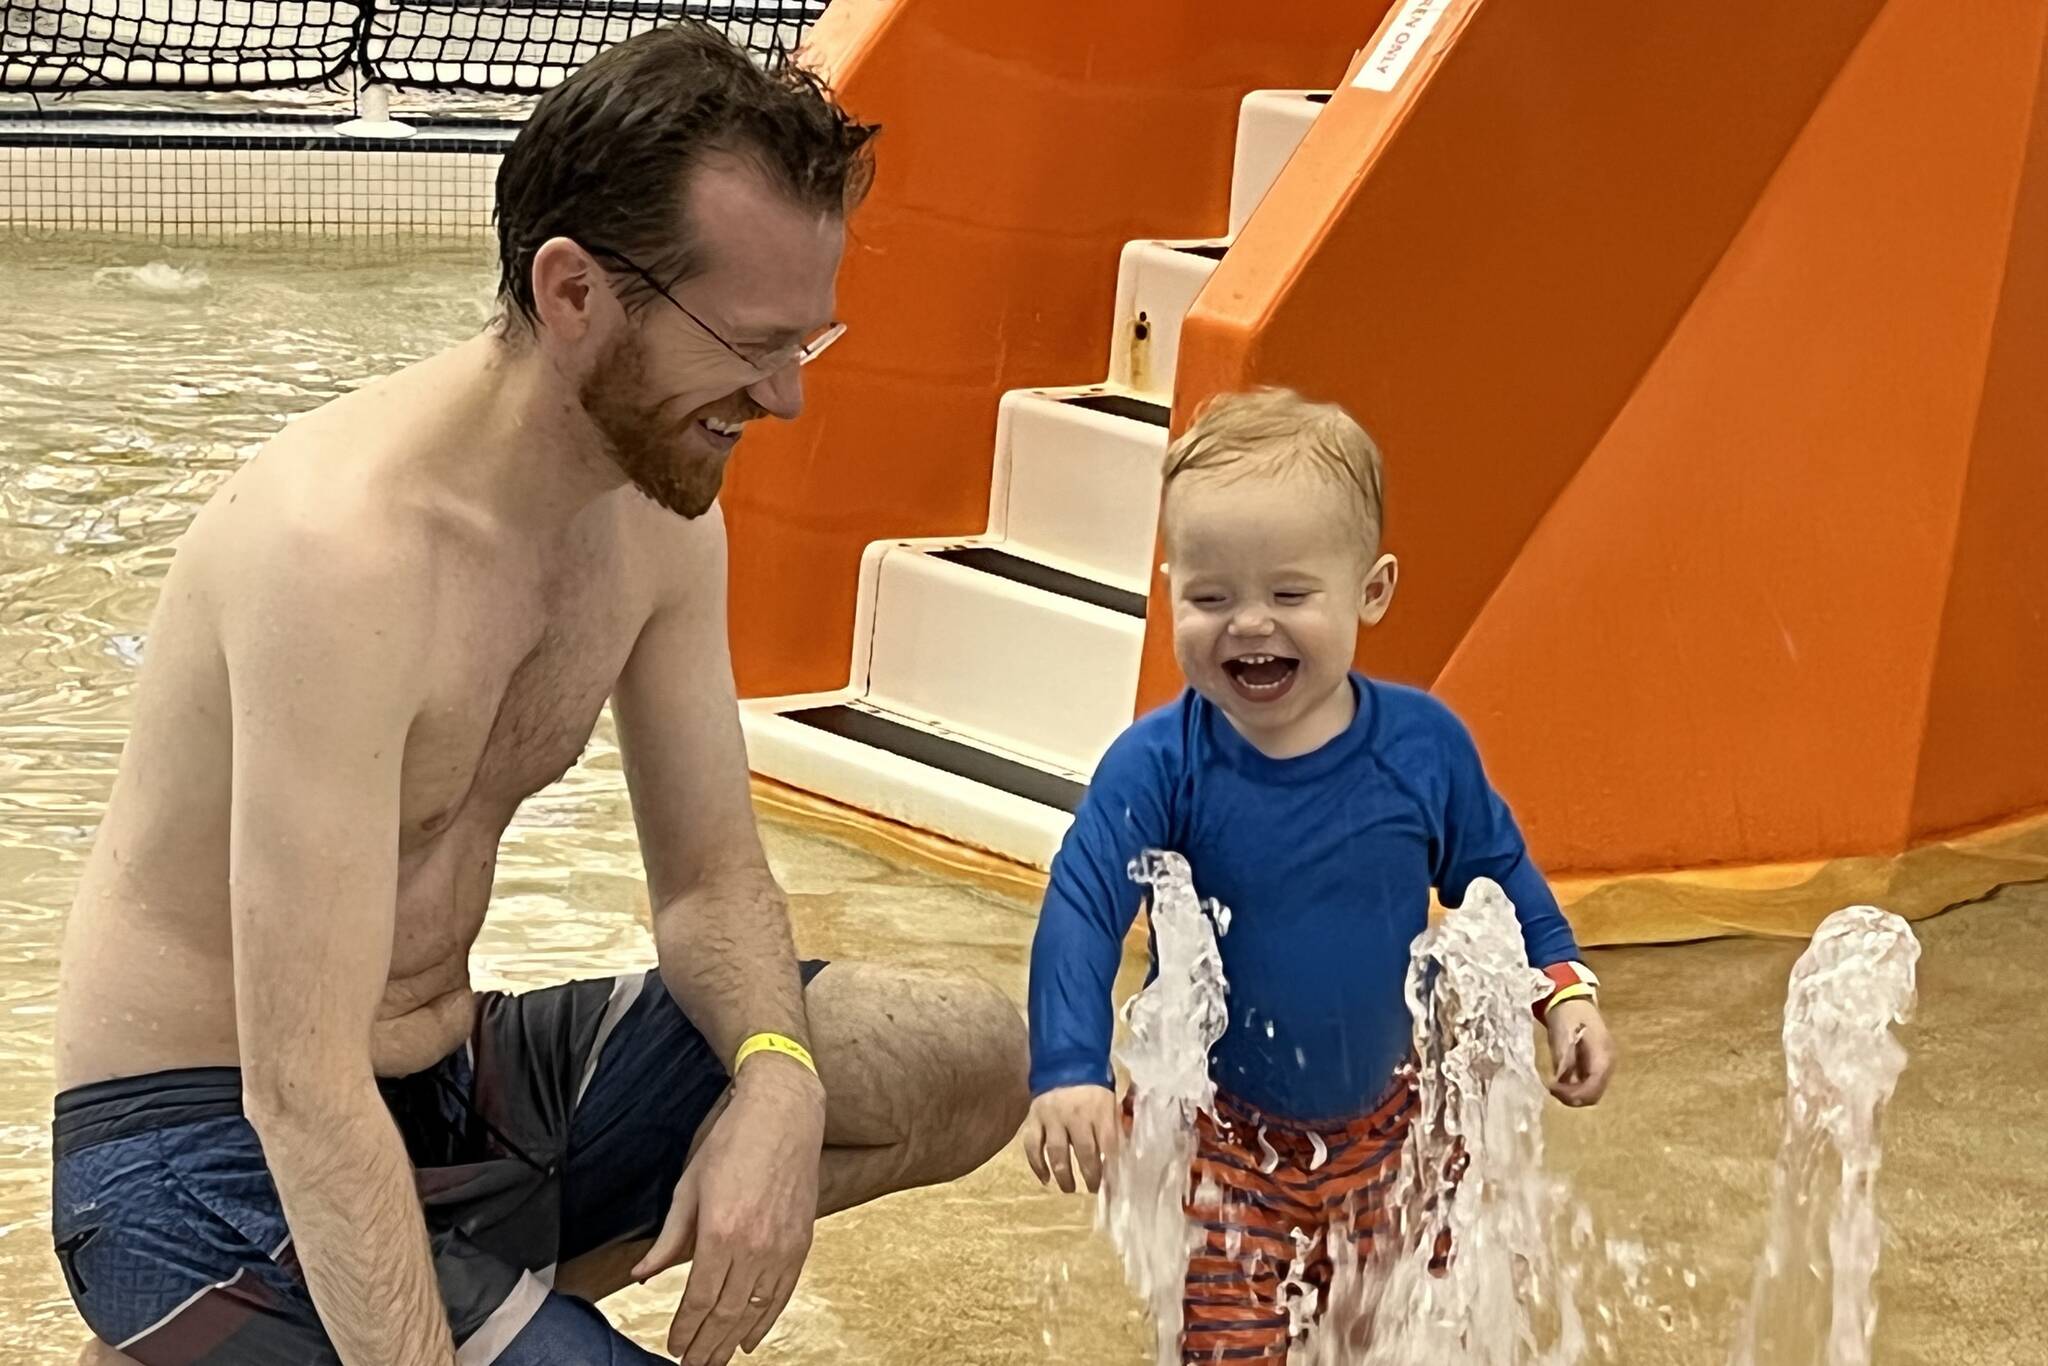 James Snookes plays with his son Harry in the pool at the Dimond Park Aquatic Center as part of the SAFE Child Advocacy Center’s free sponsored event Family Day at the Pool. (Jonson Kuhn / Juneau Empire)